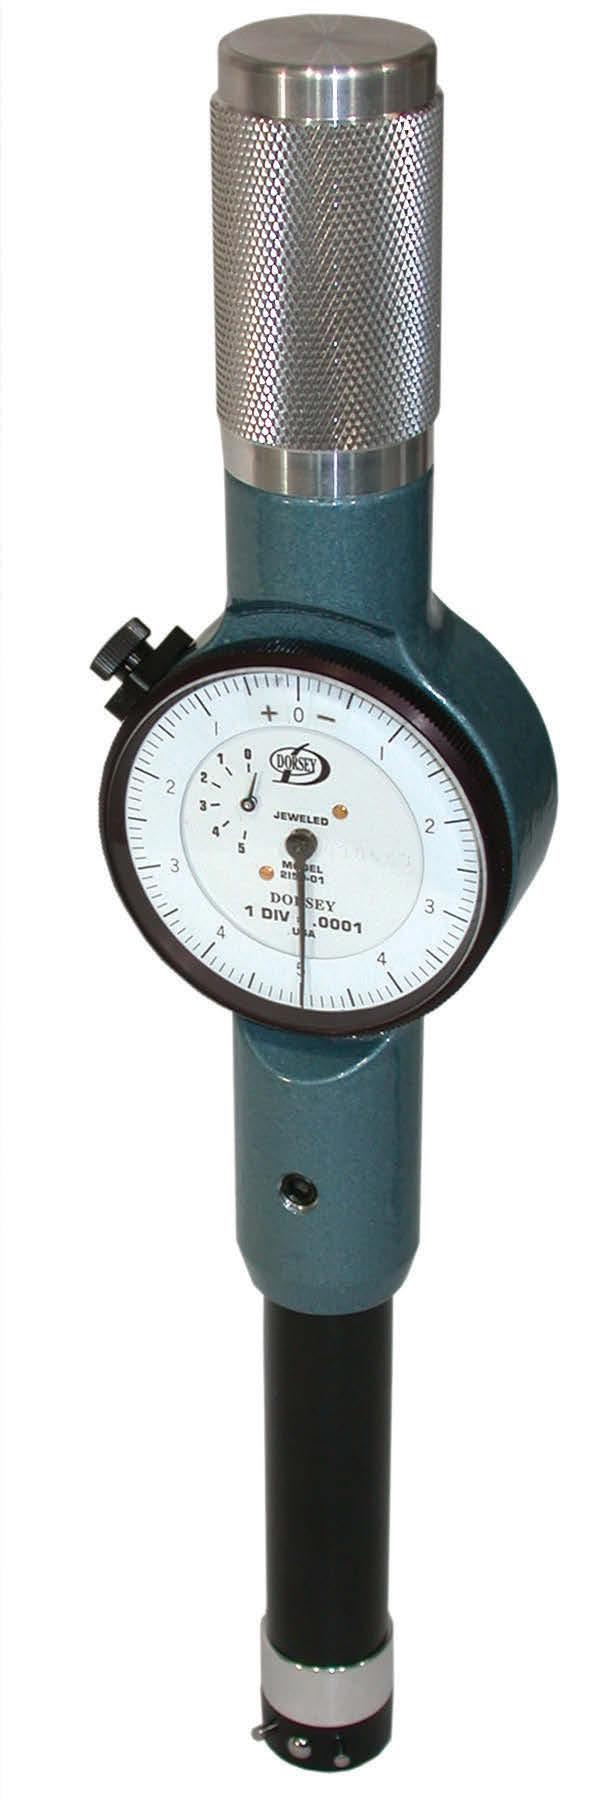 We continue to provide the original Standard Gage Company customers with high quality interchangeable parts. We also build modifications and special gage models.